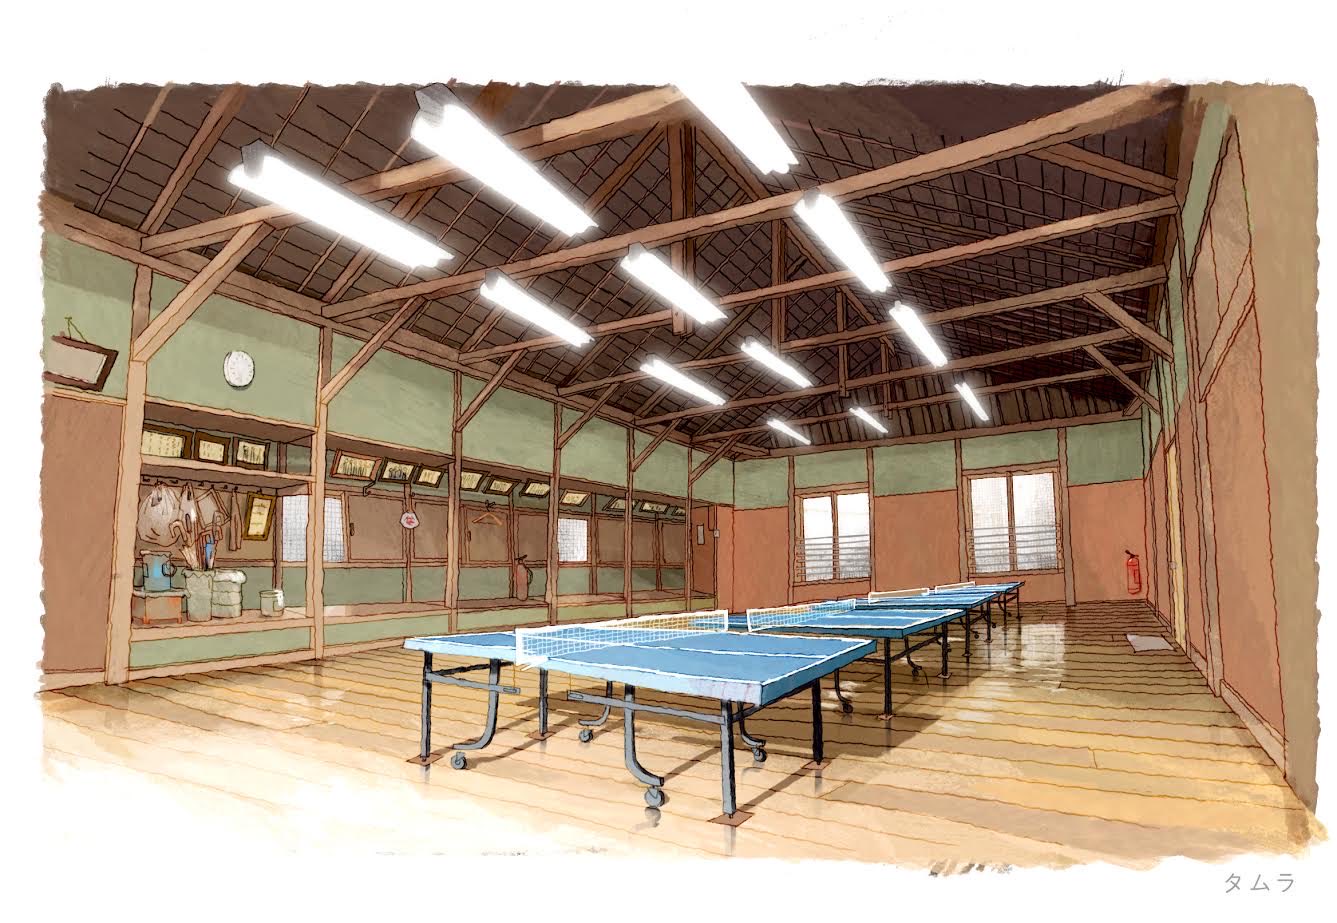 RTTP: Ping Pong the Animation